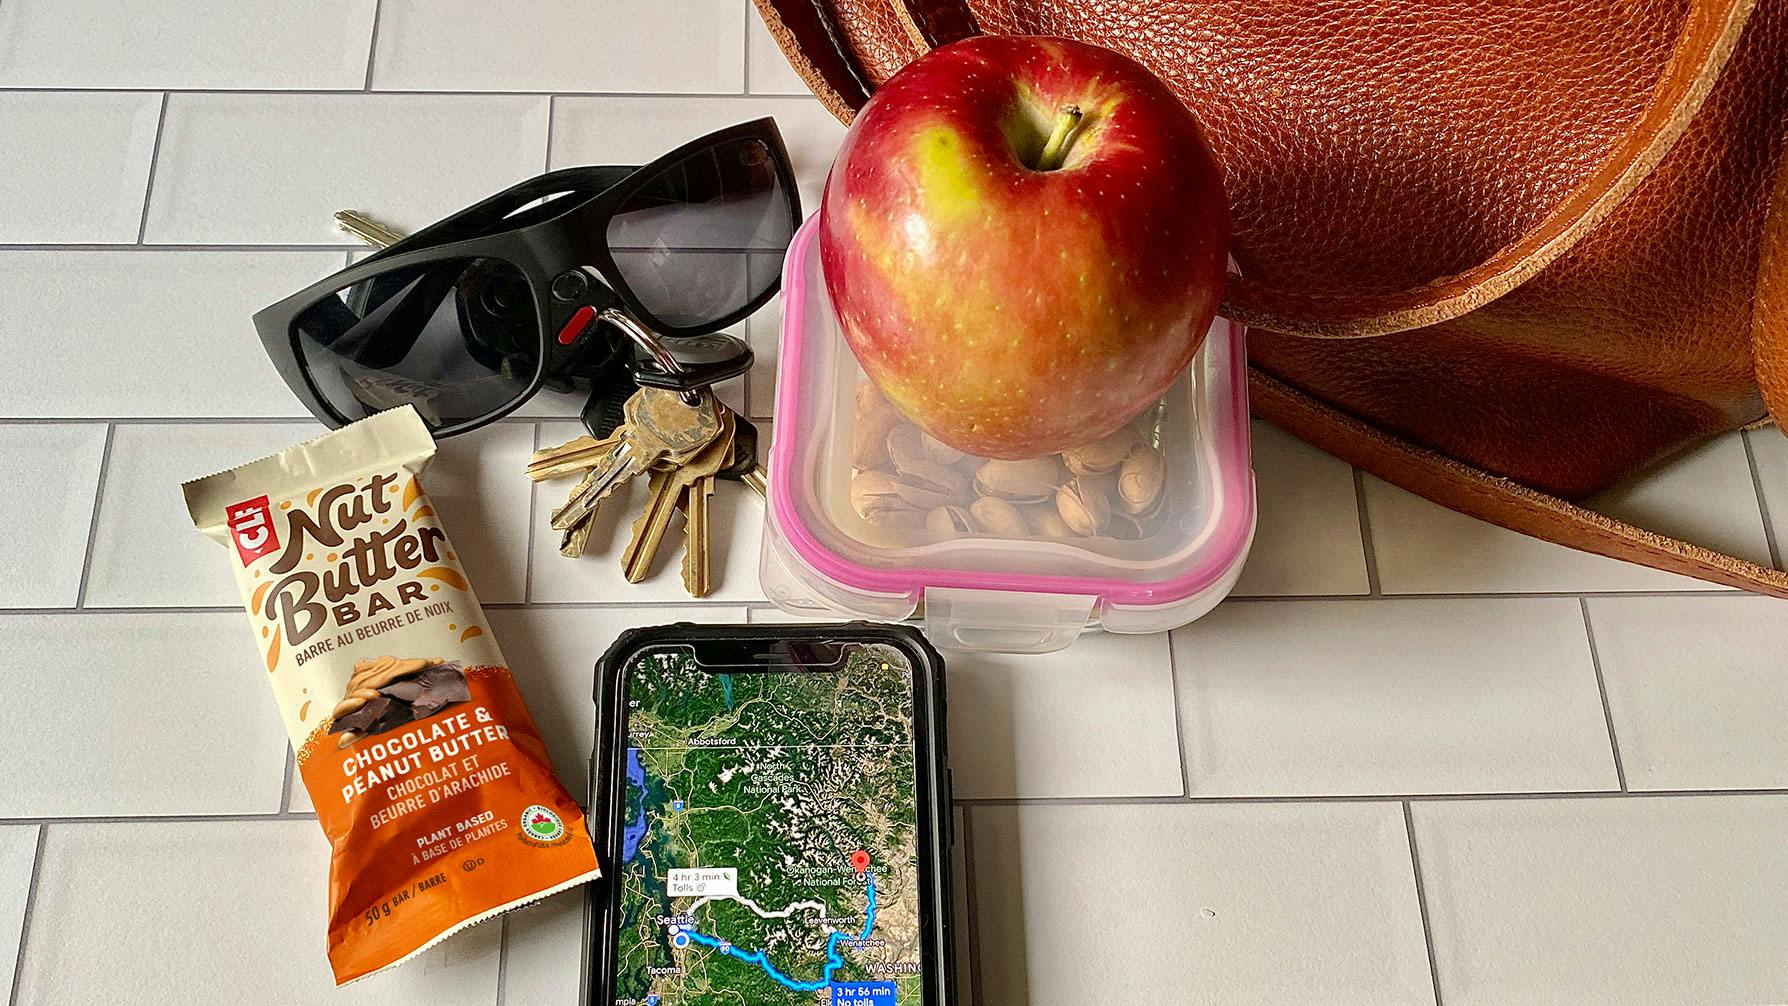 CLIF Nut Butter Bar and road trip items - Canada